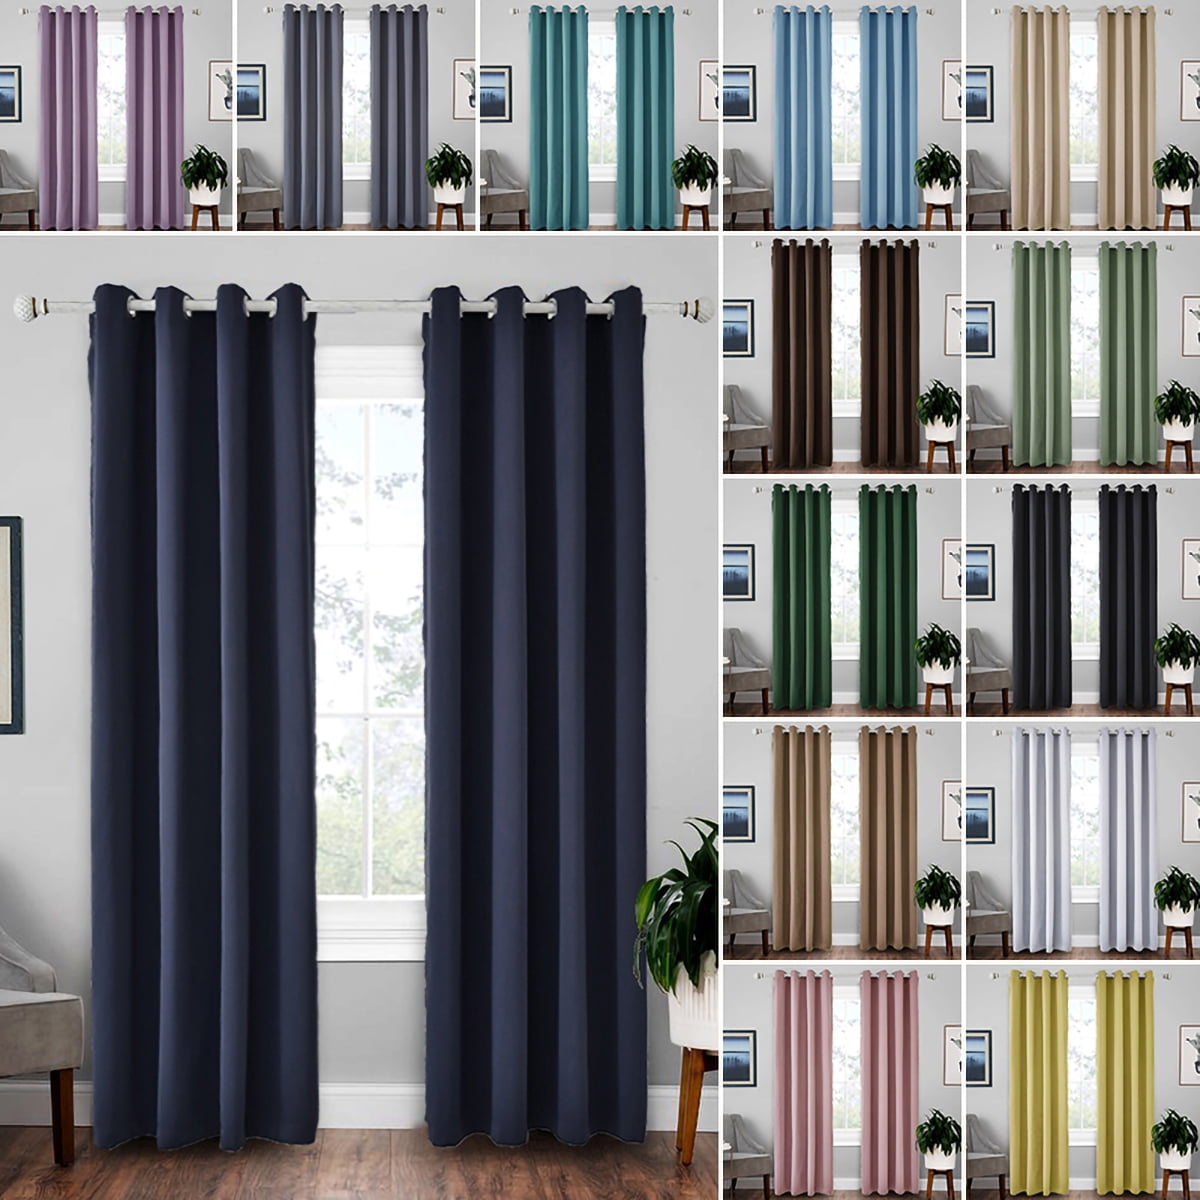 Blackout Thermal Curtains Eyelet Ring Top Block Sunlight Home office Door Window 